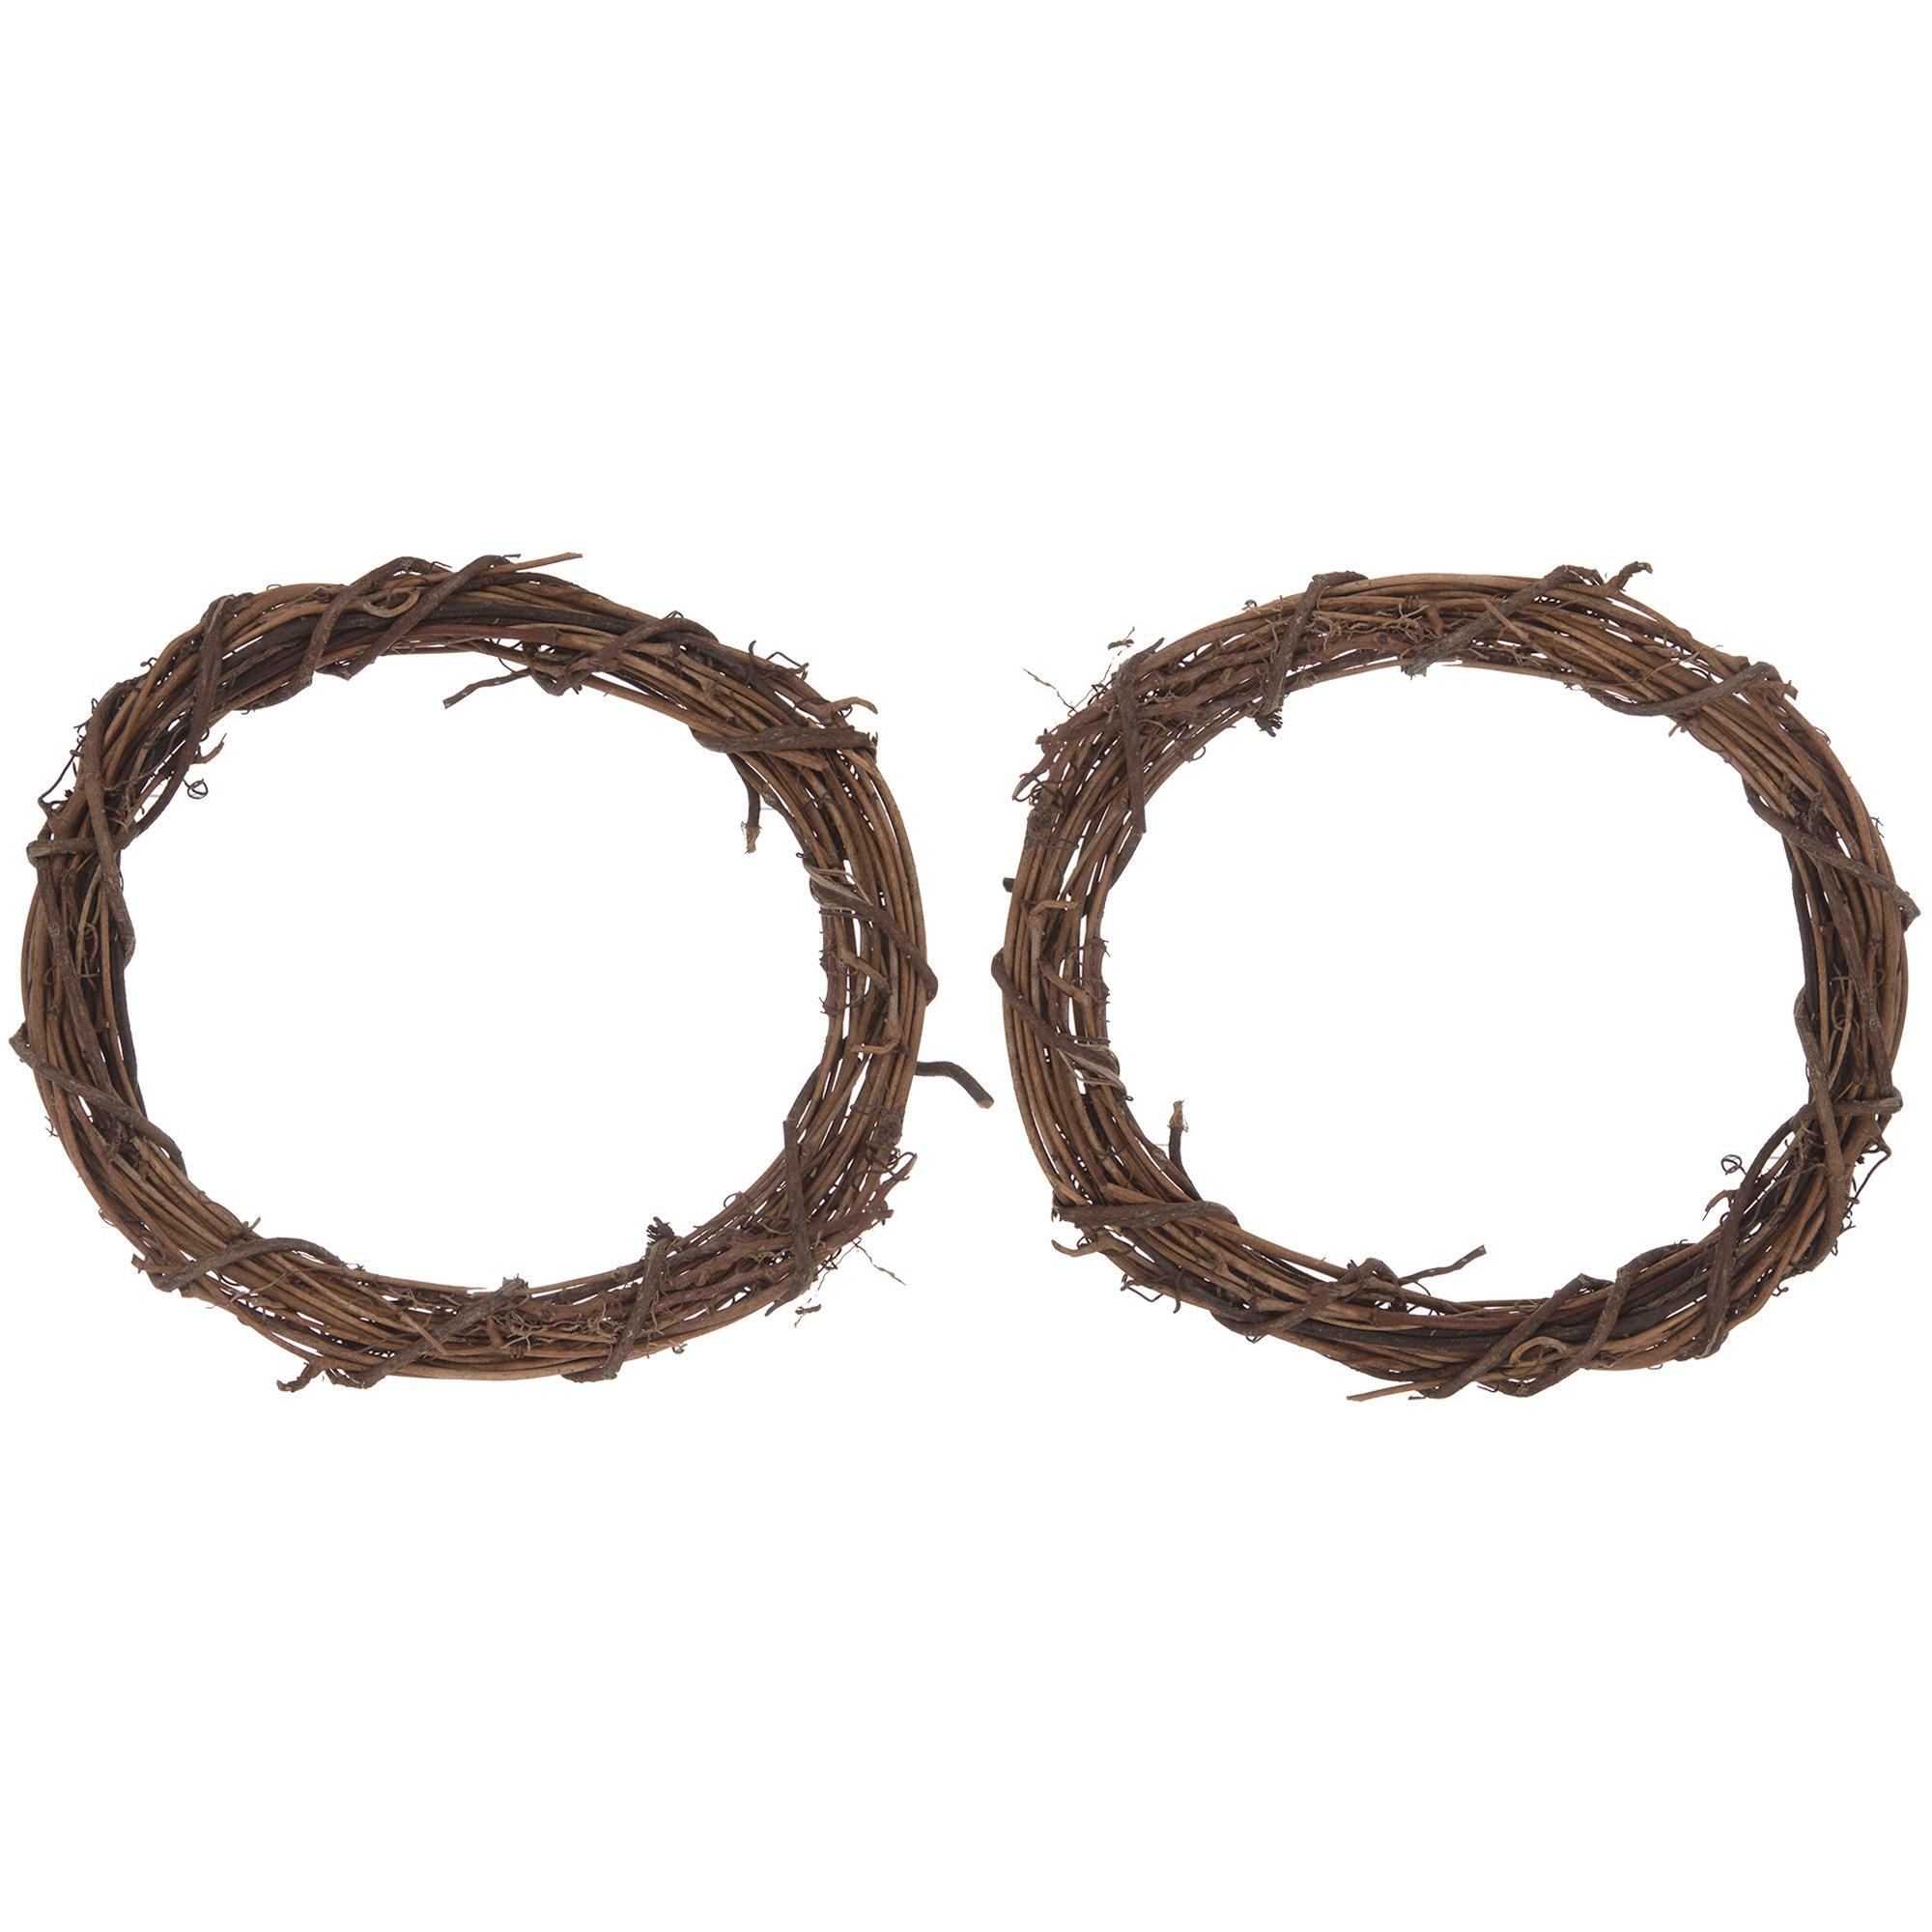 Dried Natural Grapevine Twig Garland - Use to Craft Rustic Vine Wreaths,  and Swags (15 Foot Long x 1/2 inch Diameter) Decorate with Lights